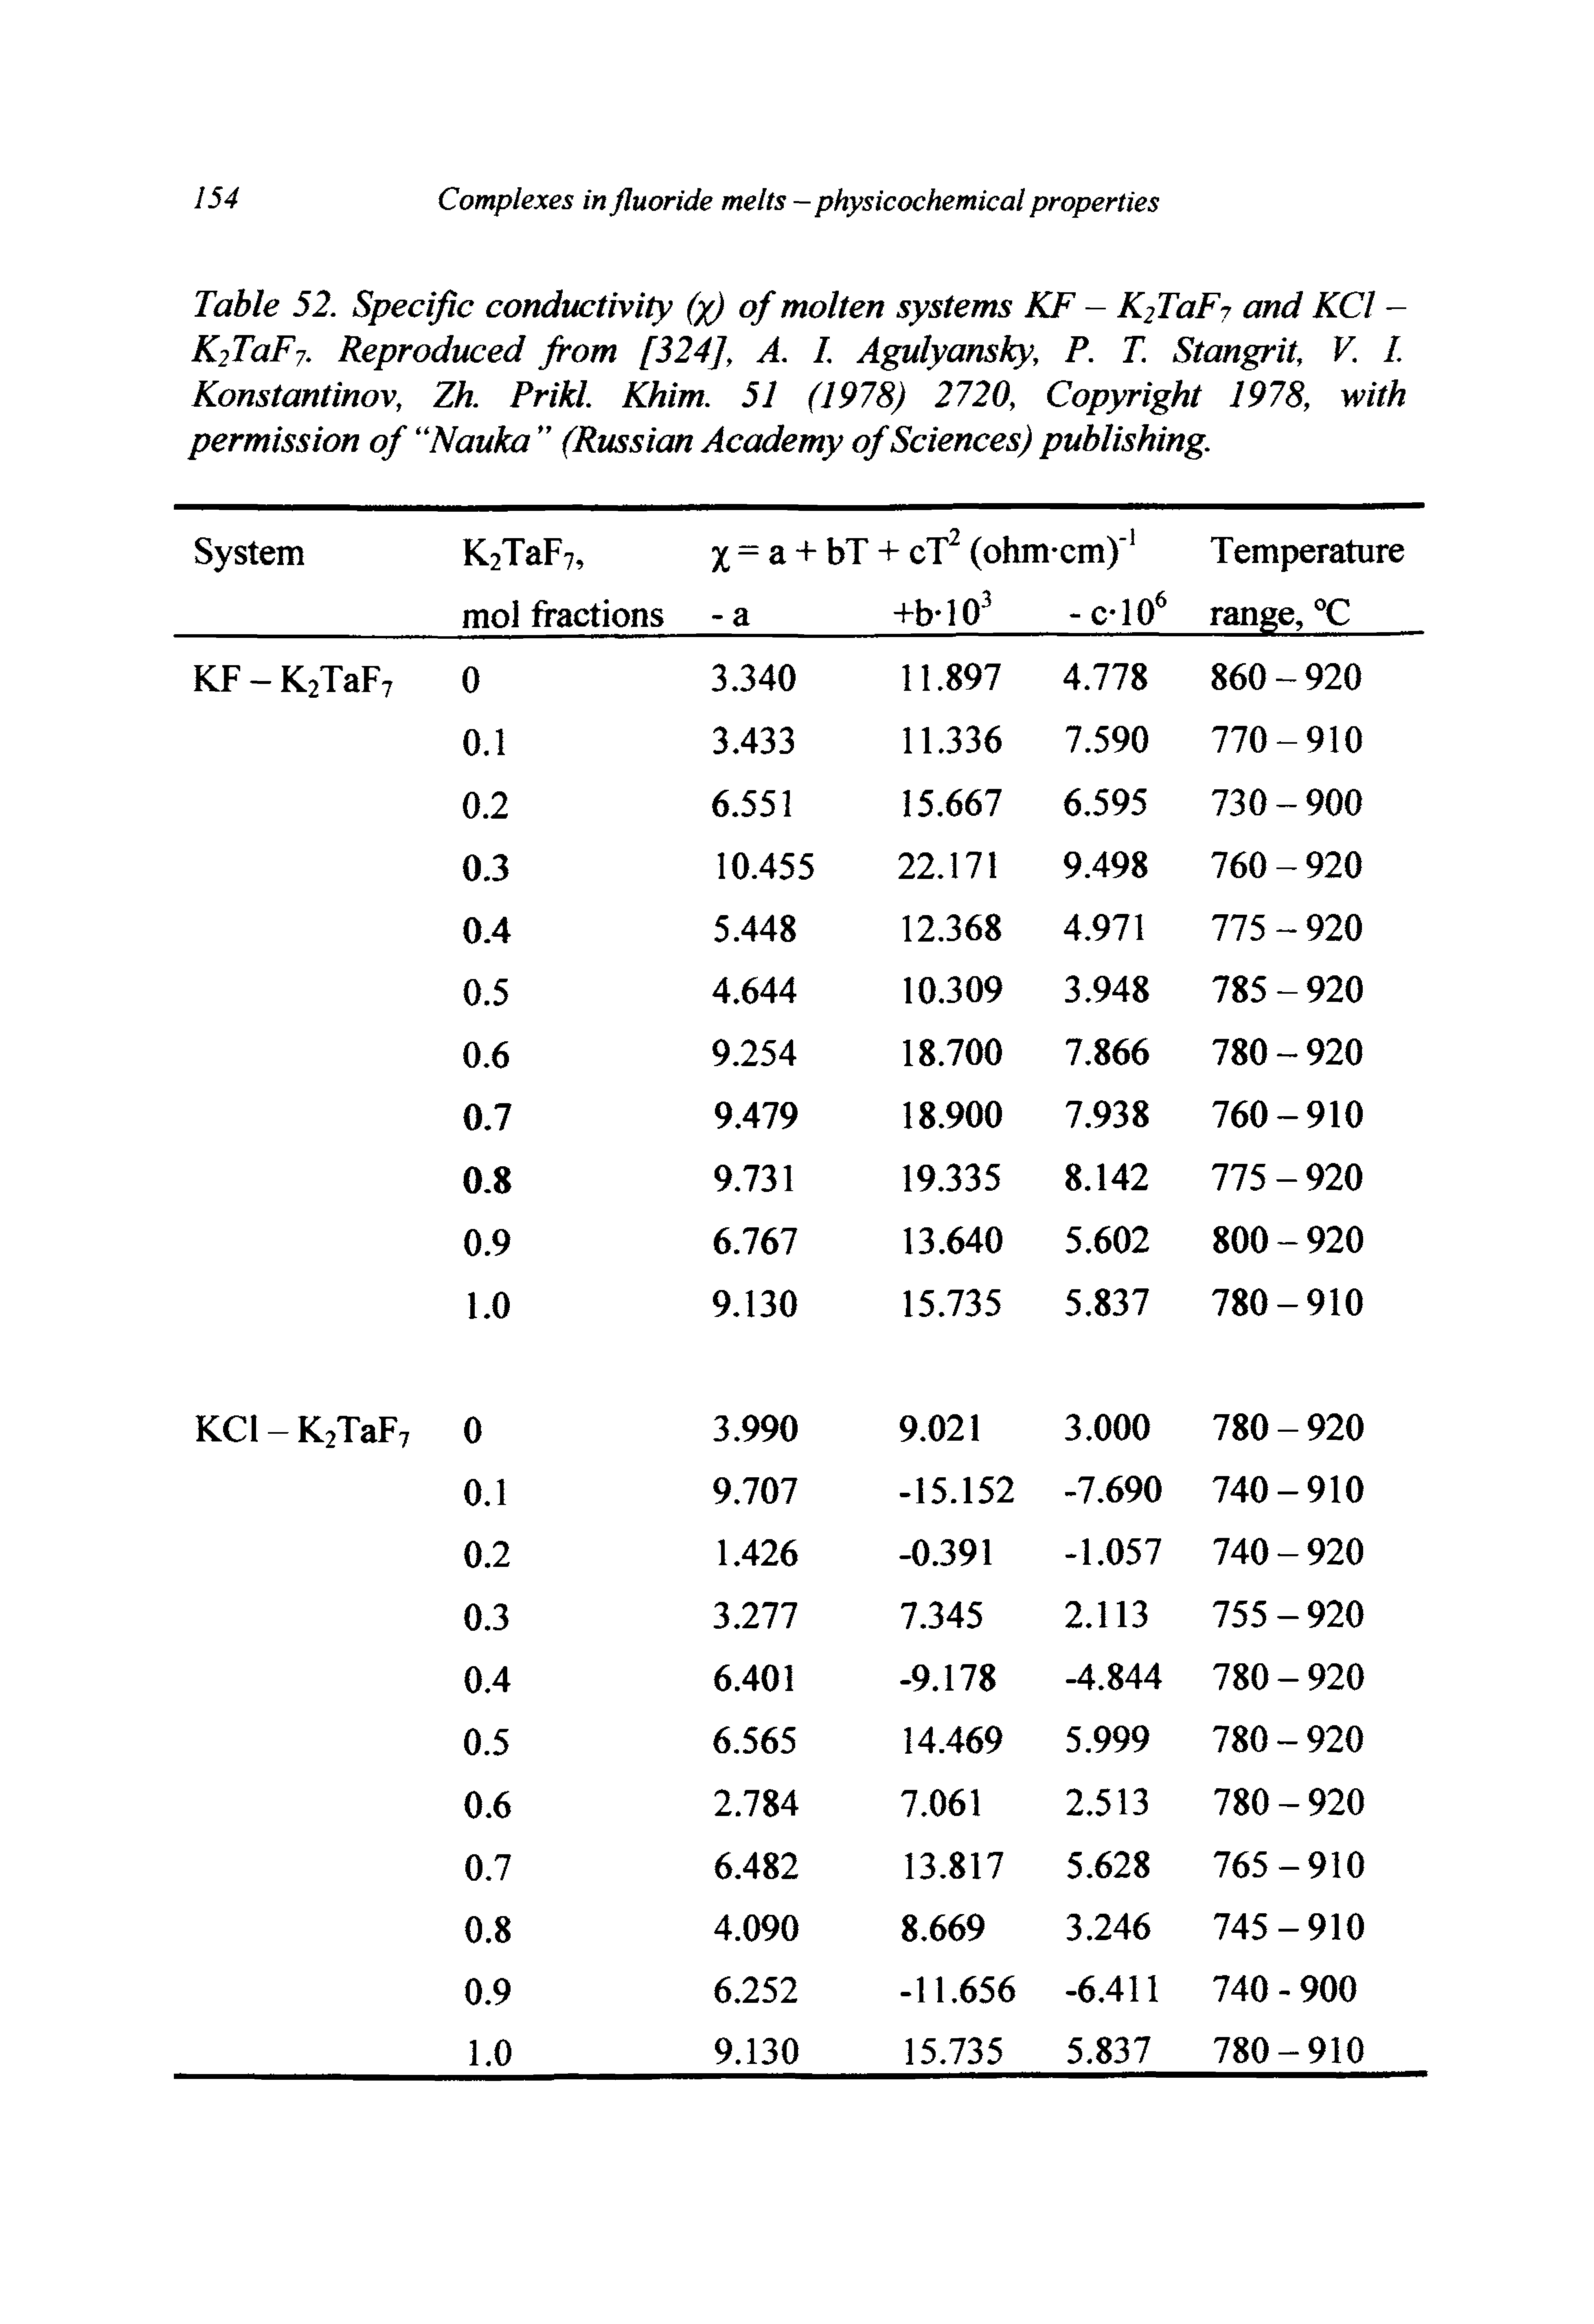 Table 52. Specific conductivity (y) of molten systems KF - K2TaFy and KCl -K2TaF7. Reproduced from [324], A. I. Agulyansky, P. T. Stangrit, V. I. Konstantinov, Zh. Prikl. Khim. 51 (1978) 2720, Copyright 1978, with permission of Nauka (Russian Academy of Sciences) publishing.